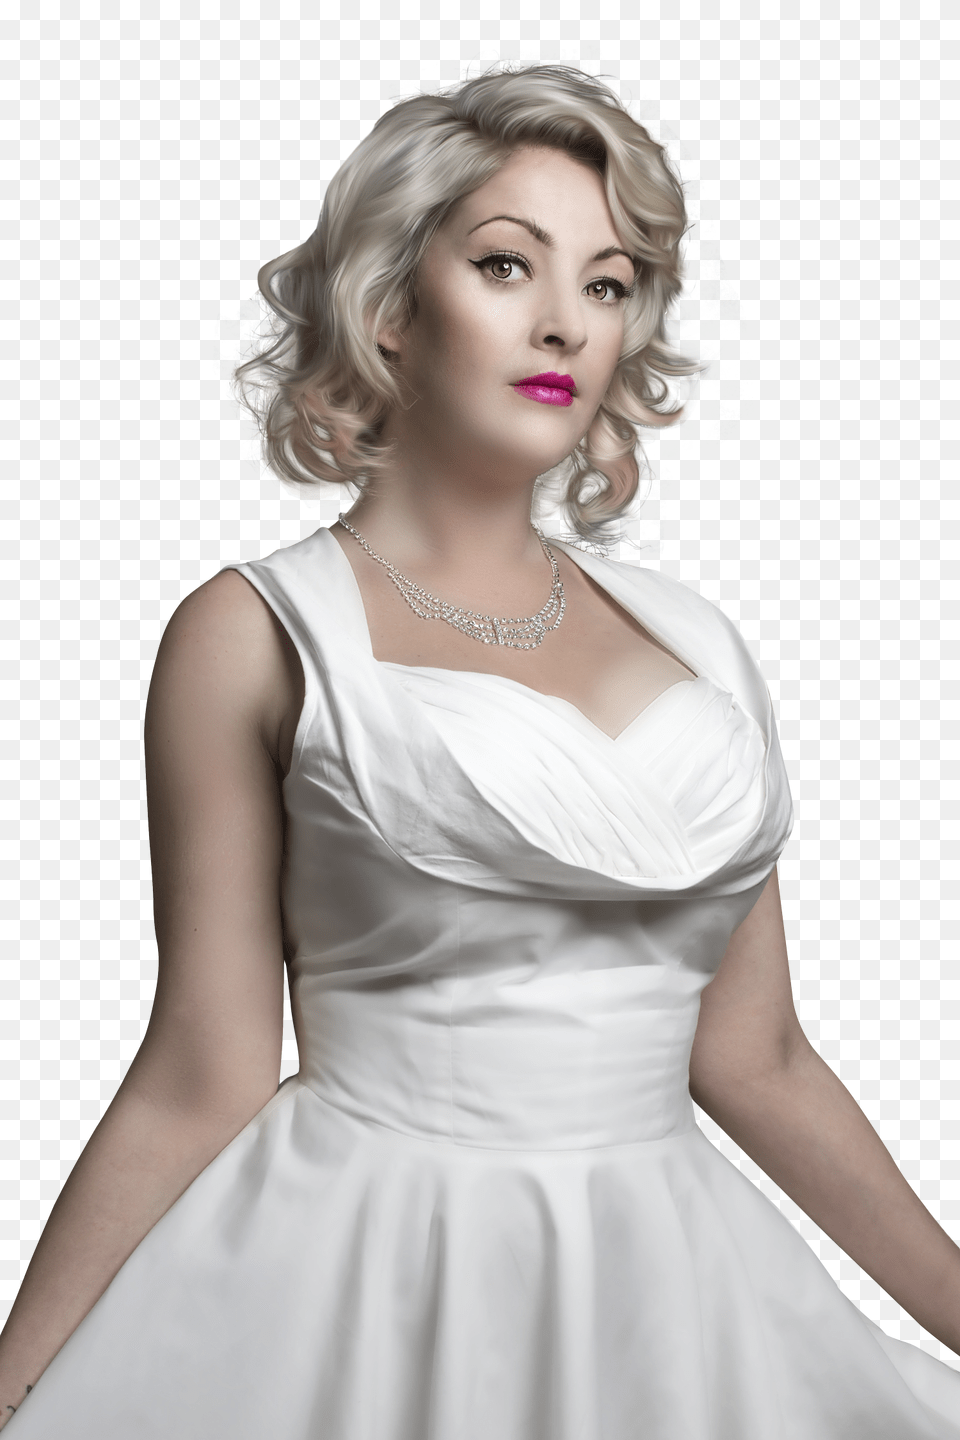 Pngpix Com Beautiful Female Model In White Dress Image, Gown, Clothing, Evening Dress, Fashion Free Transparent Png